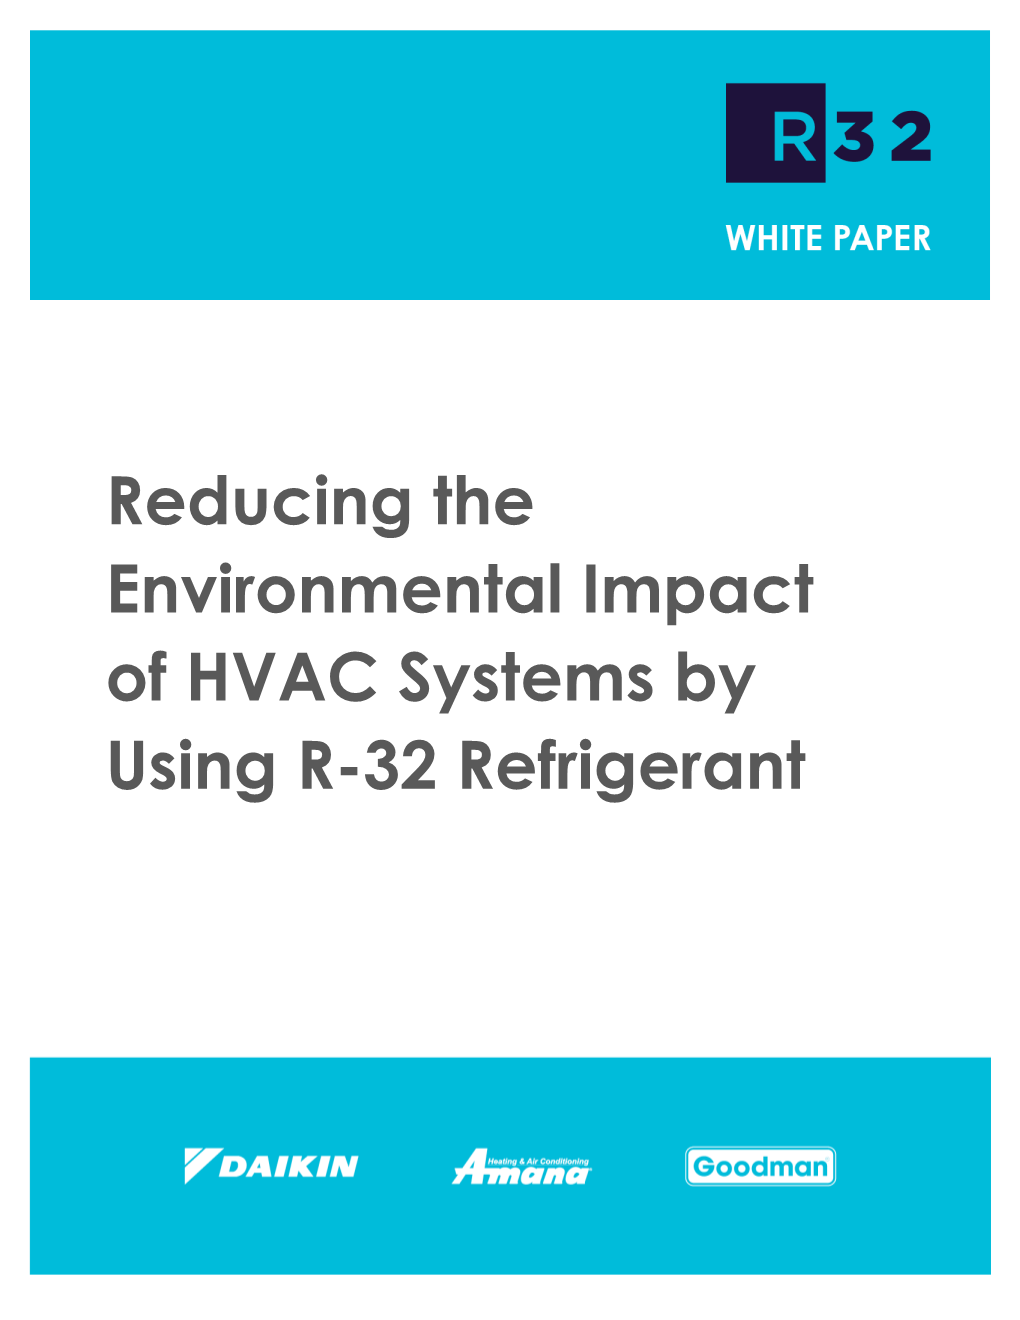 Reducing the Environmental Impact of HVAC Systems by Using R-32 Refrigerant